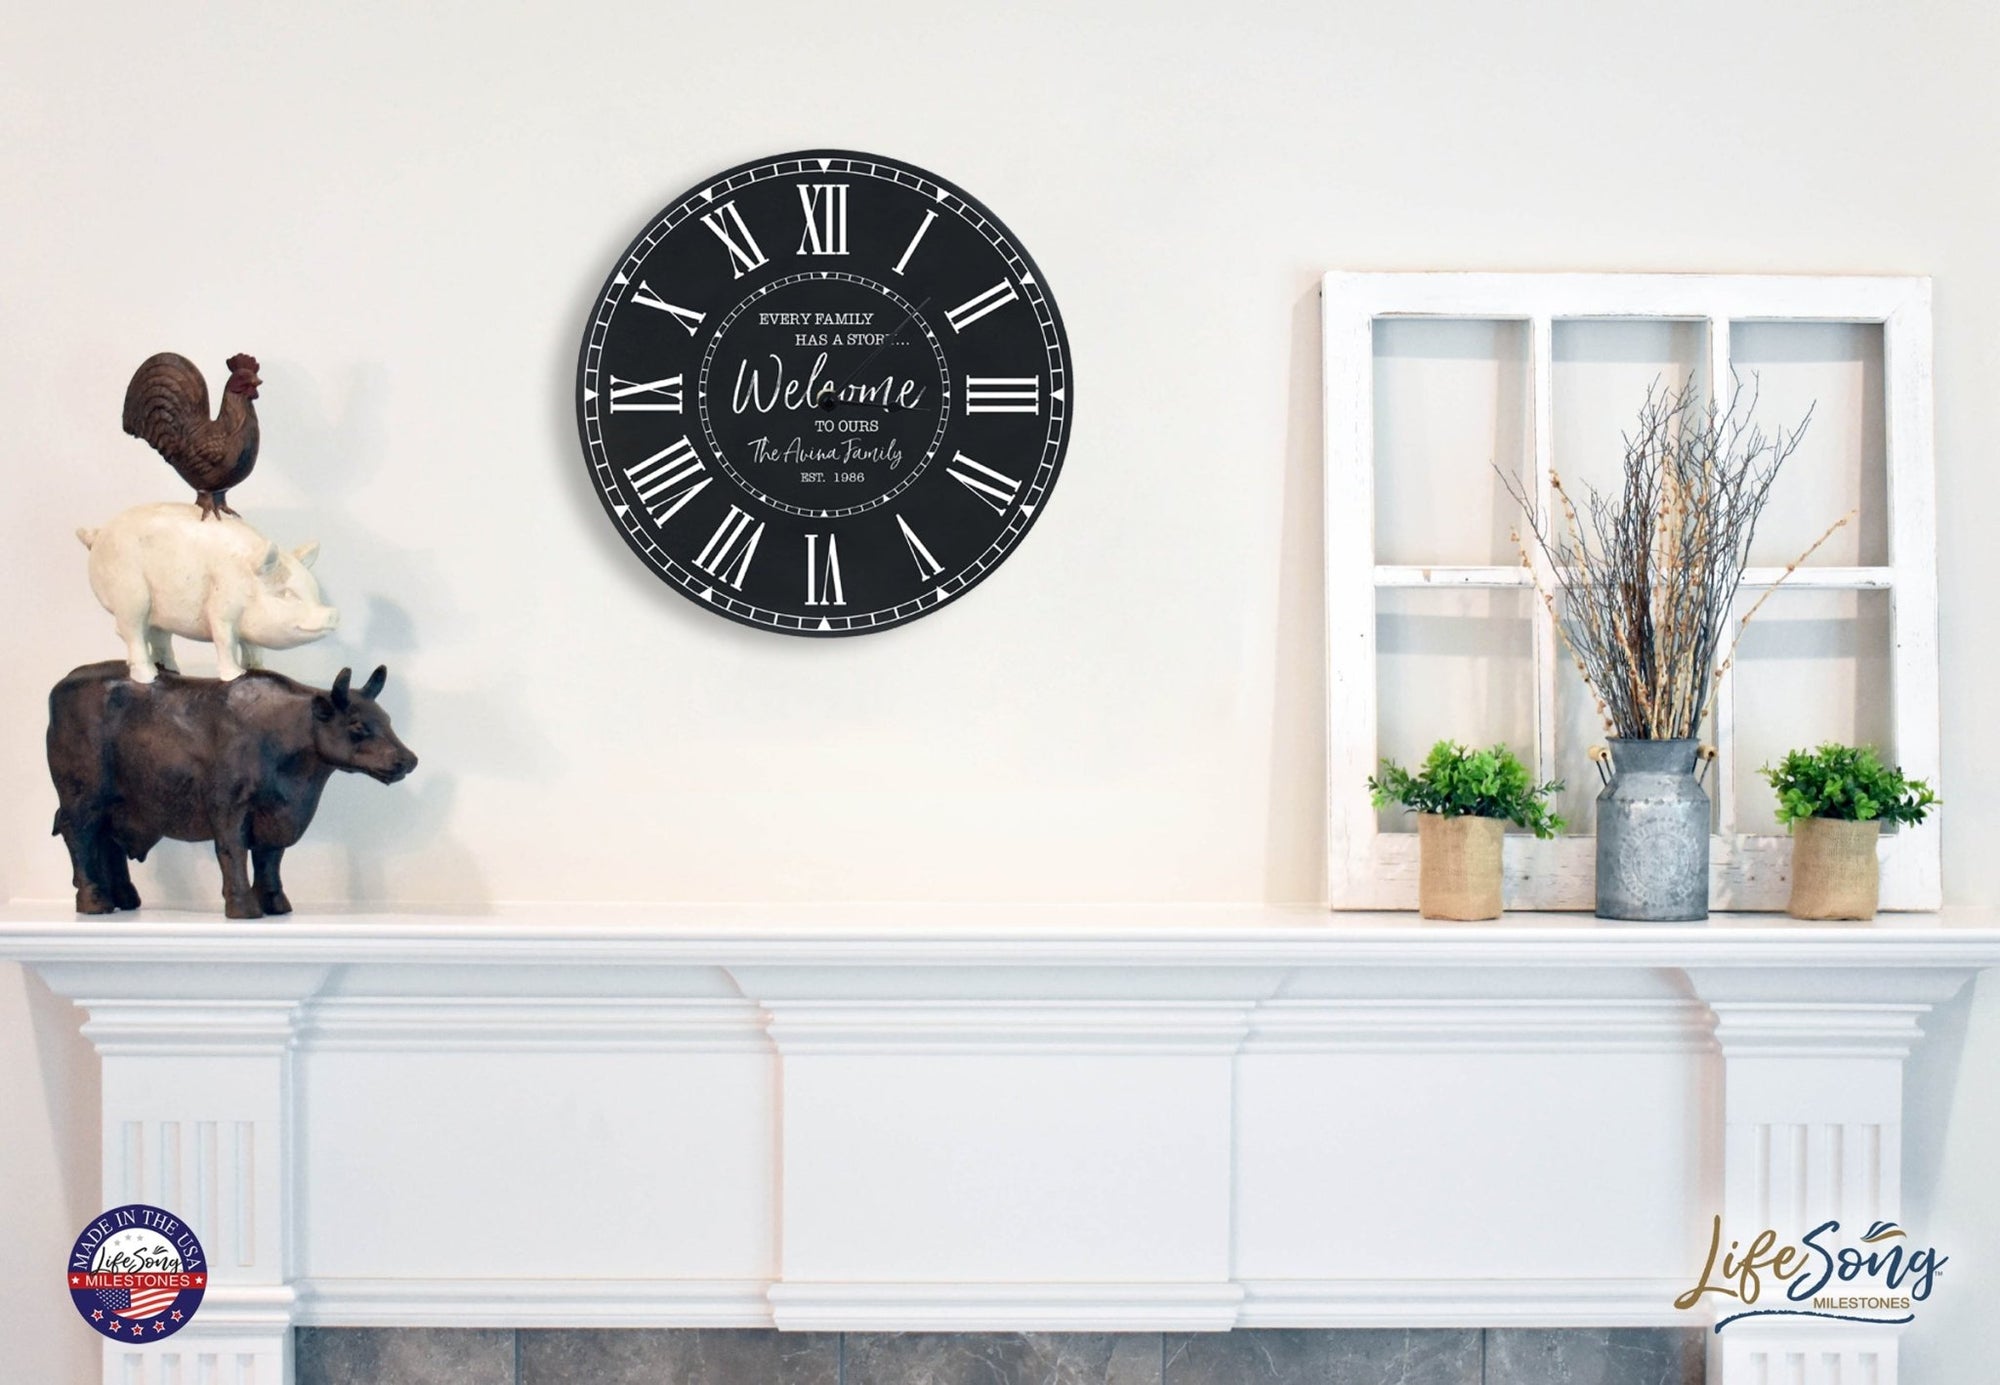 Custom Everyday Home and Family Clock 12” x 0.75” Every Family Has Welcome - LifeSong Milestones